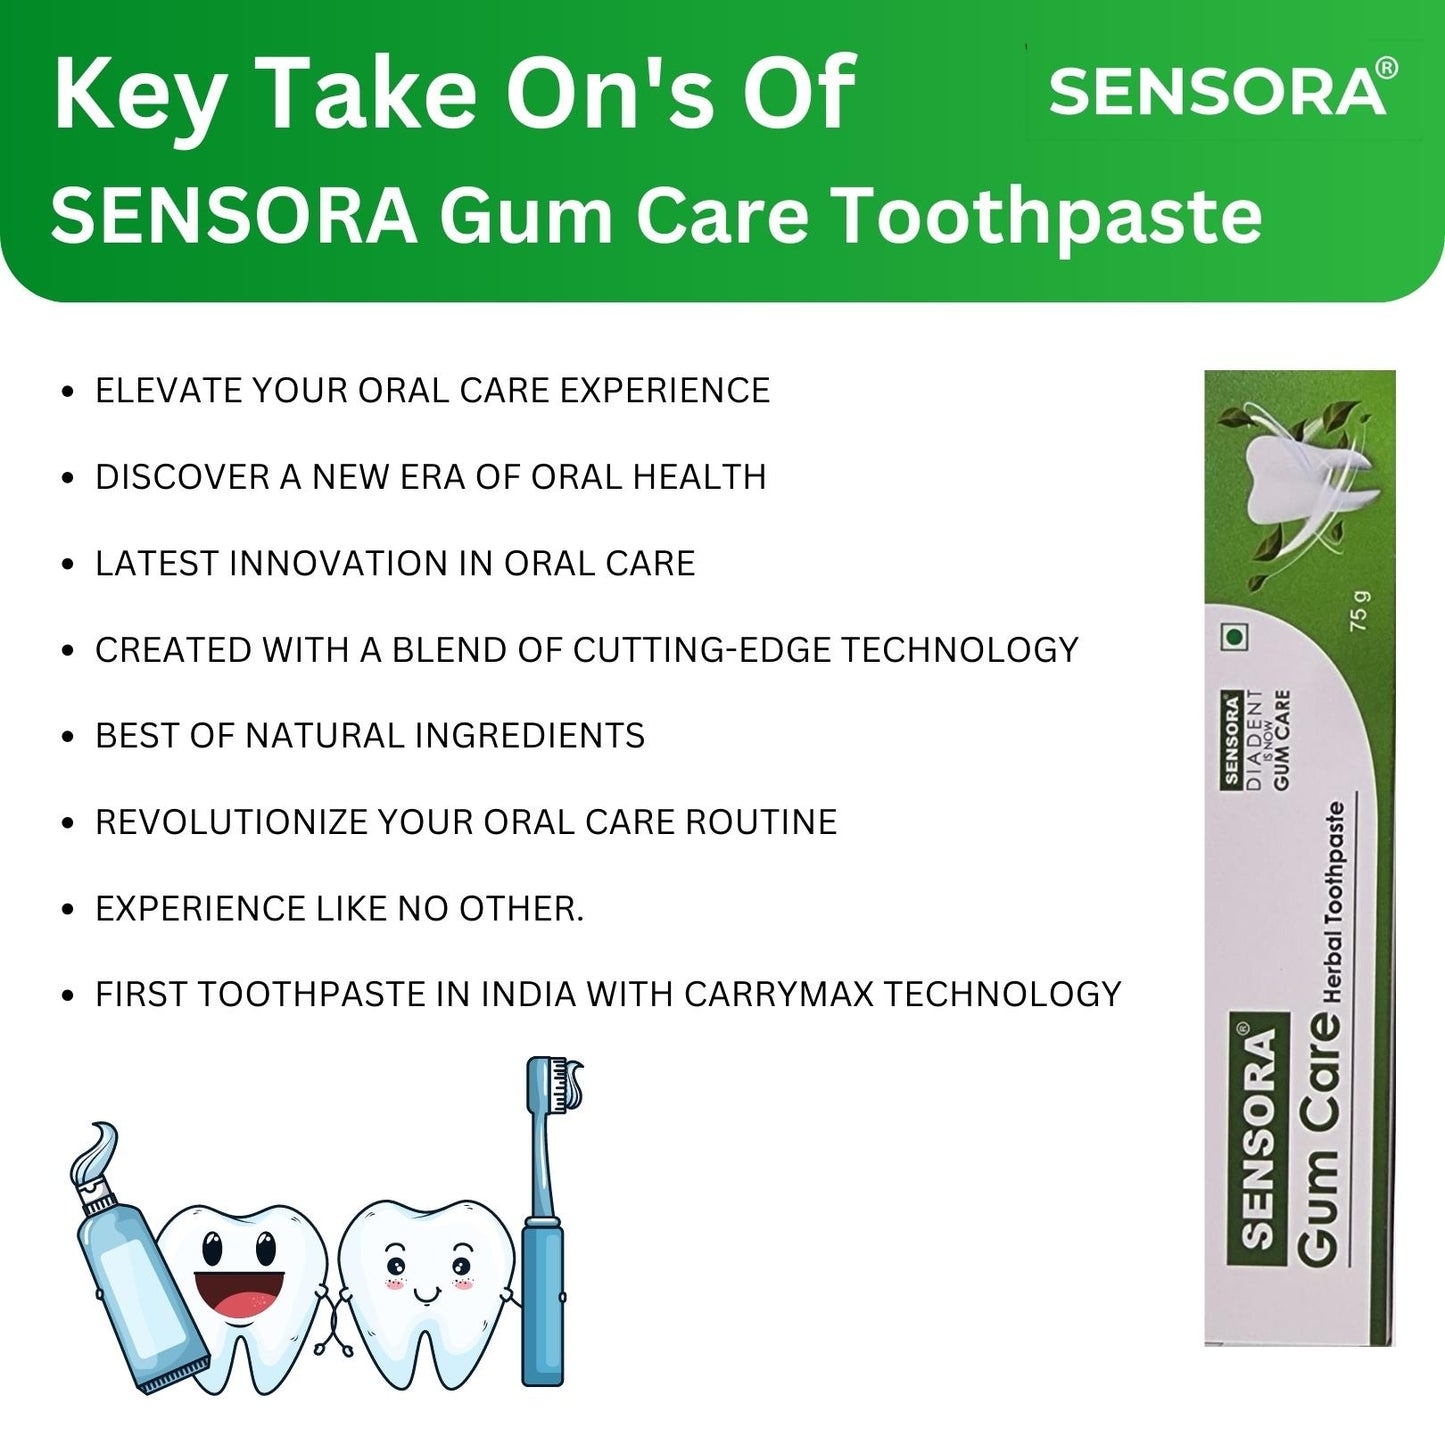 3+3 OFFER. SENSORA Gum Care Toothpaste - Pack of 3 and FREE 2 Super soft toothbrushes and 1 tongue cleaner